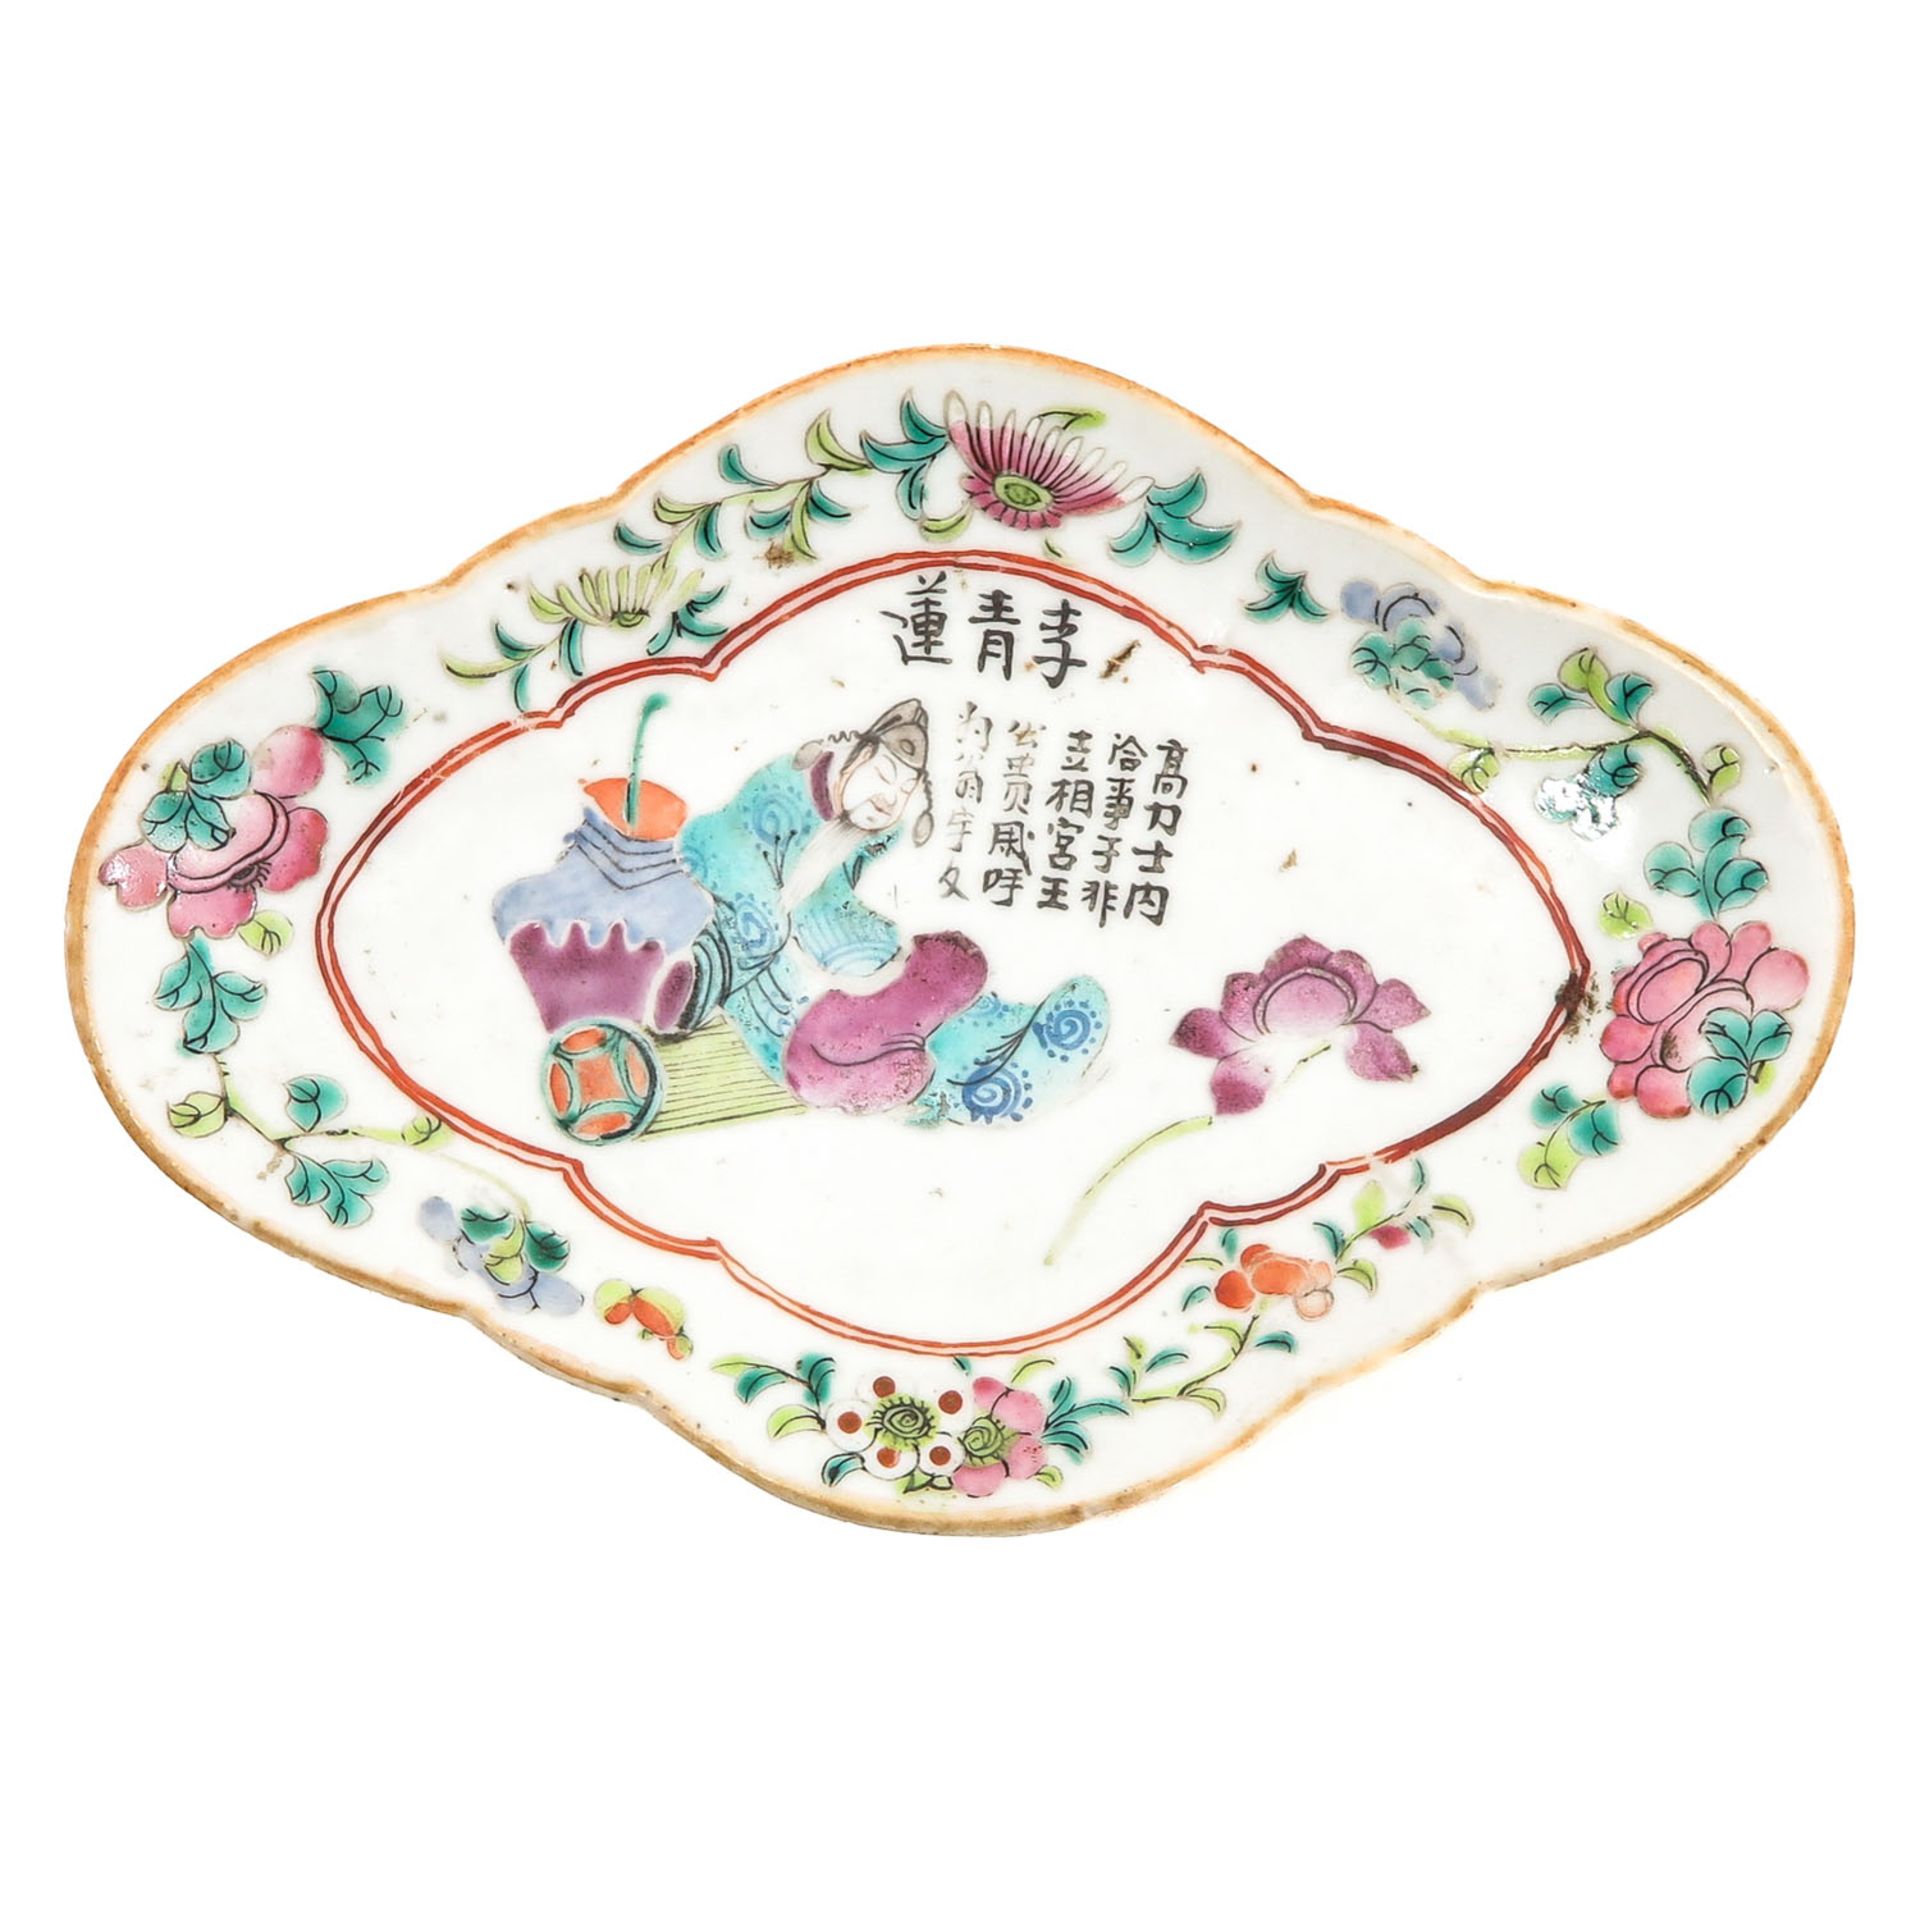 A Wu Shuang Pu Famille Rose Altar Dish - Image 5 of 9